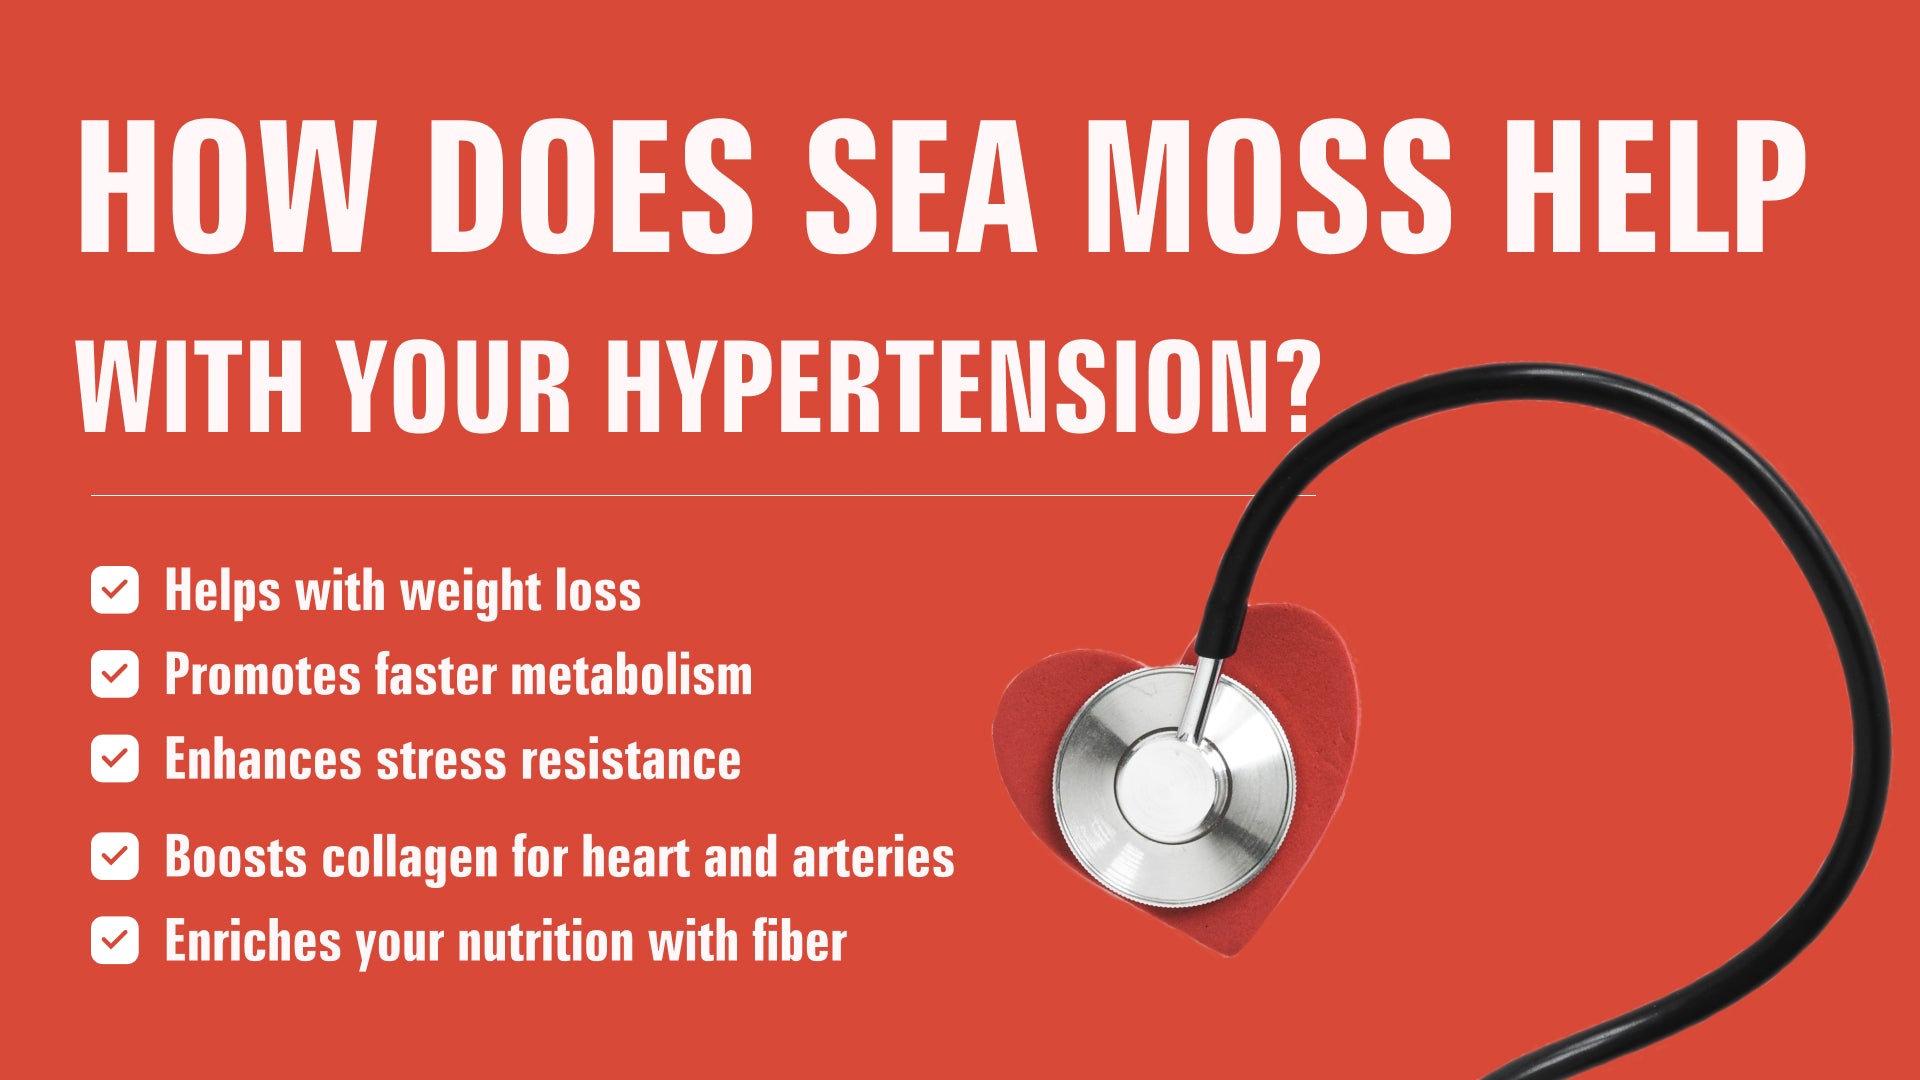 how does sea moss help with hypertension?